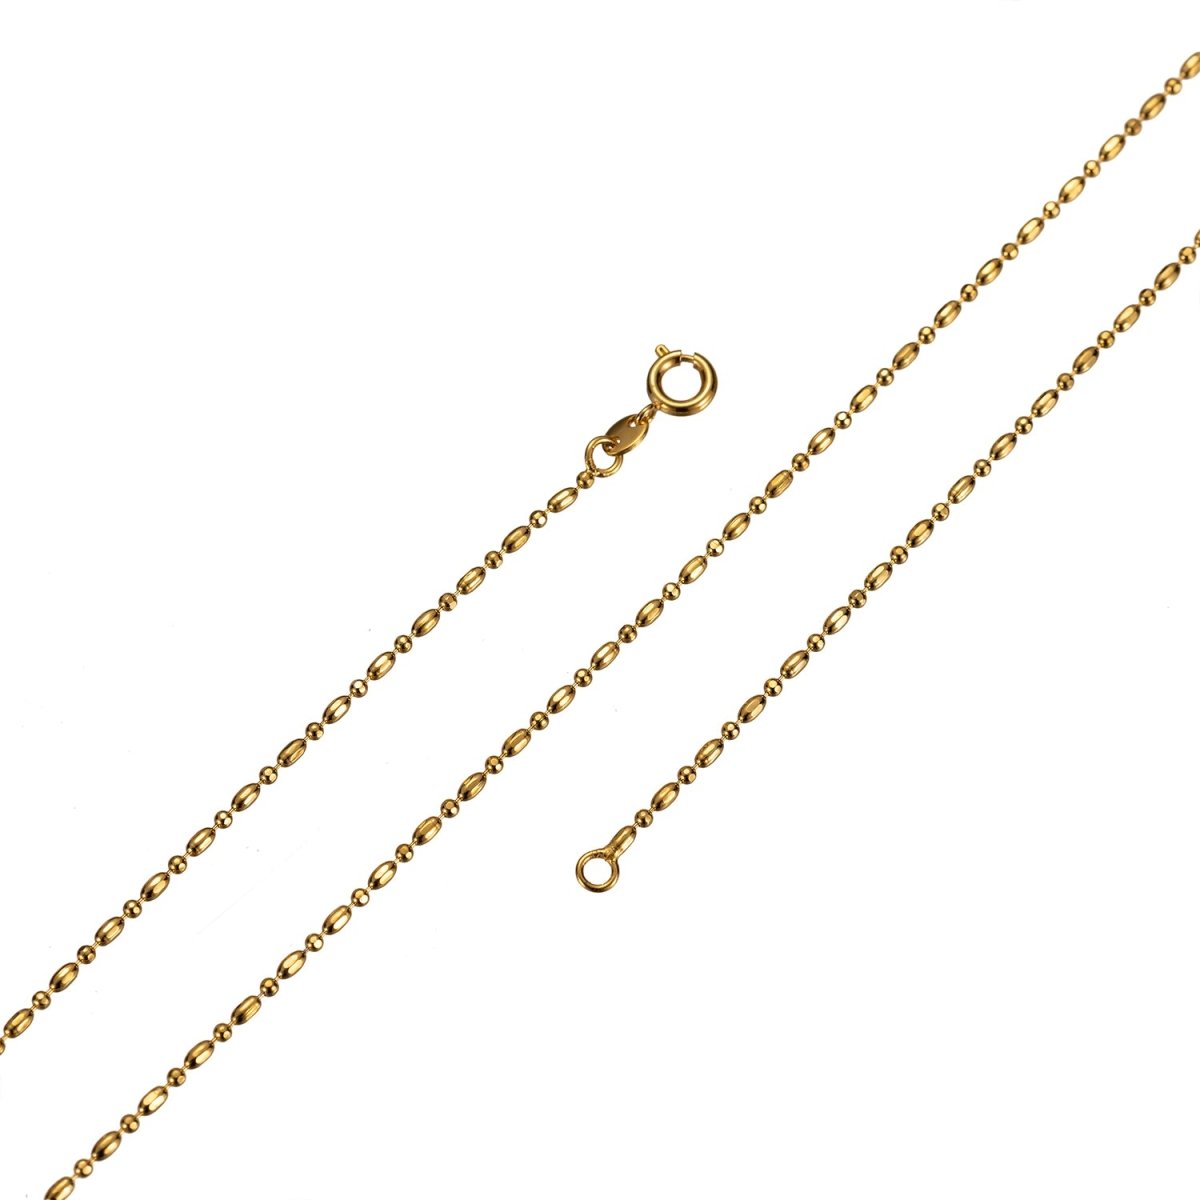 19.6 inch Beaded Chain Necklace, 24K Gold Plated Bead Finished Necklace, Dainty 1.5mm Bead Necklace w/ Spring Ring | CN-480 Clearance Pricing - DLUXCA